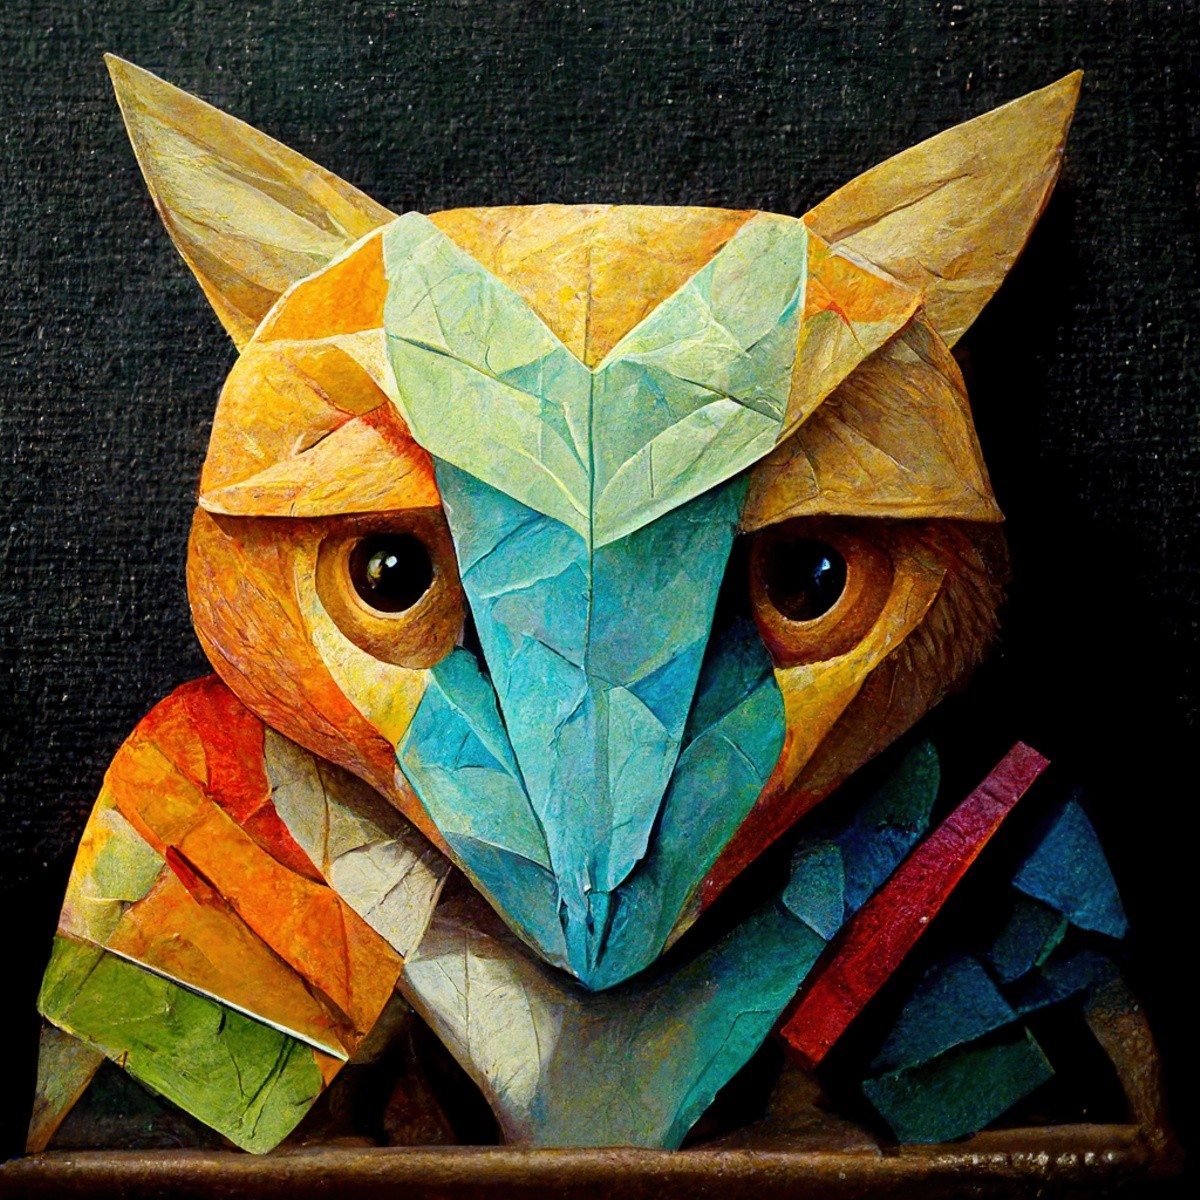 Origami and Paper Craft in Art and Illustration